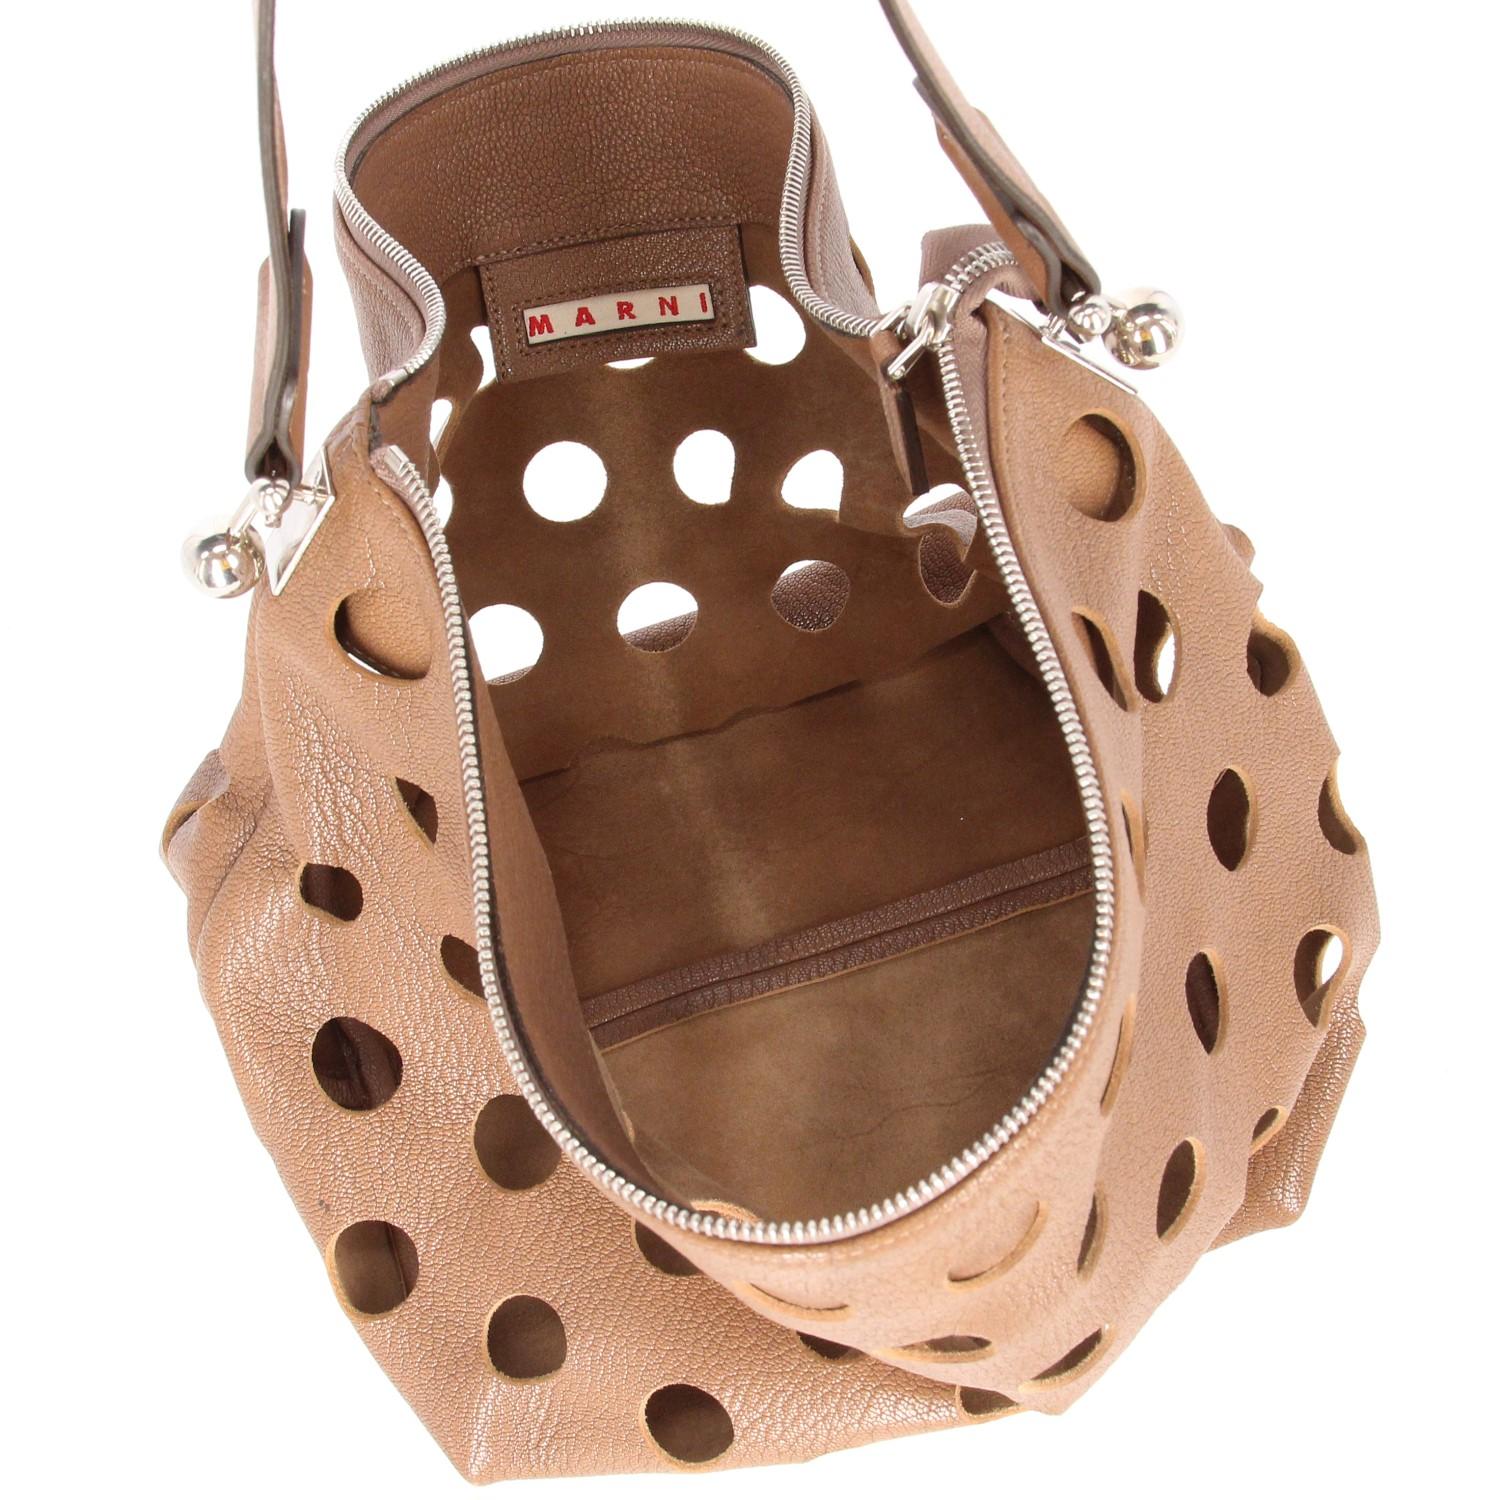 2000s Marni Perforated Brown Leather Tote Bag 3